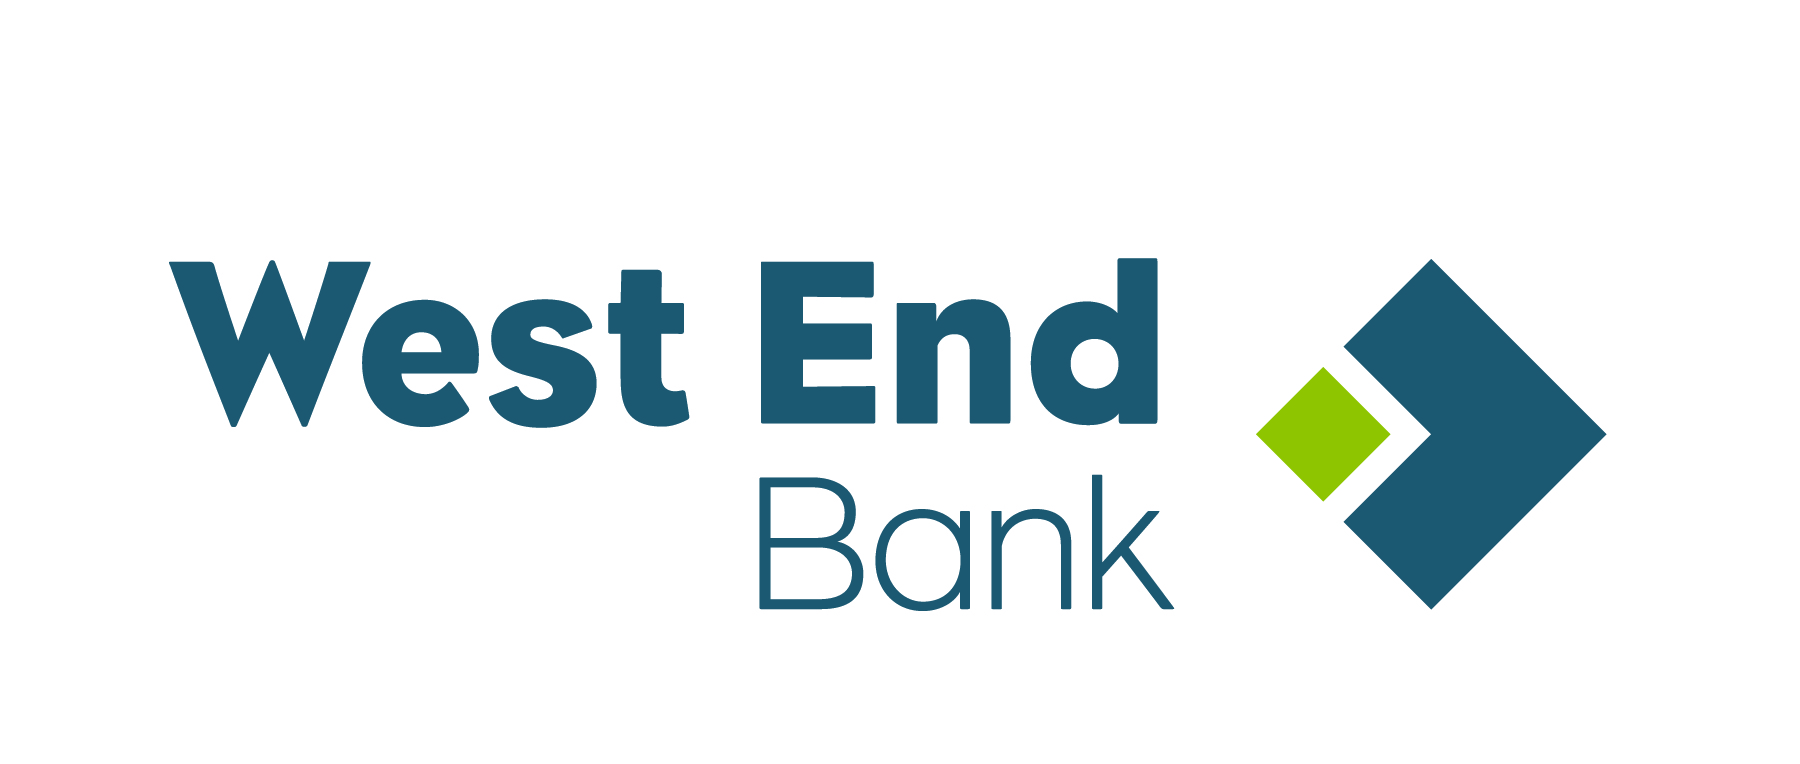 West End Bank